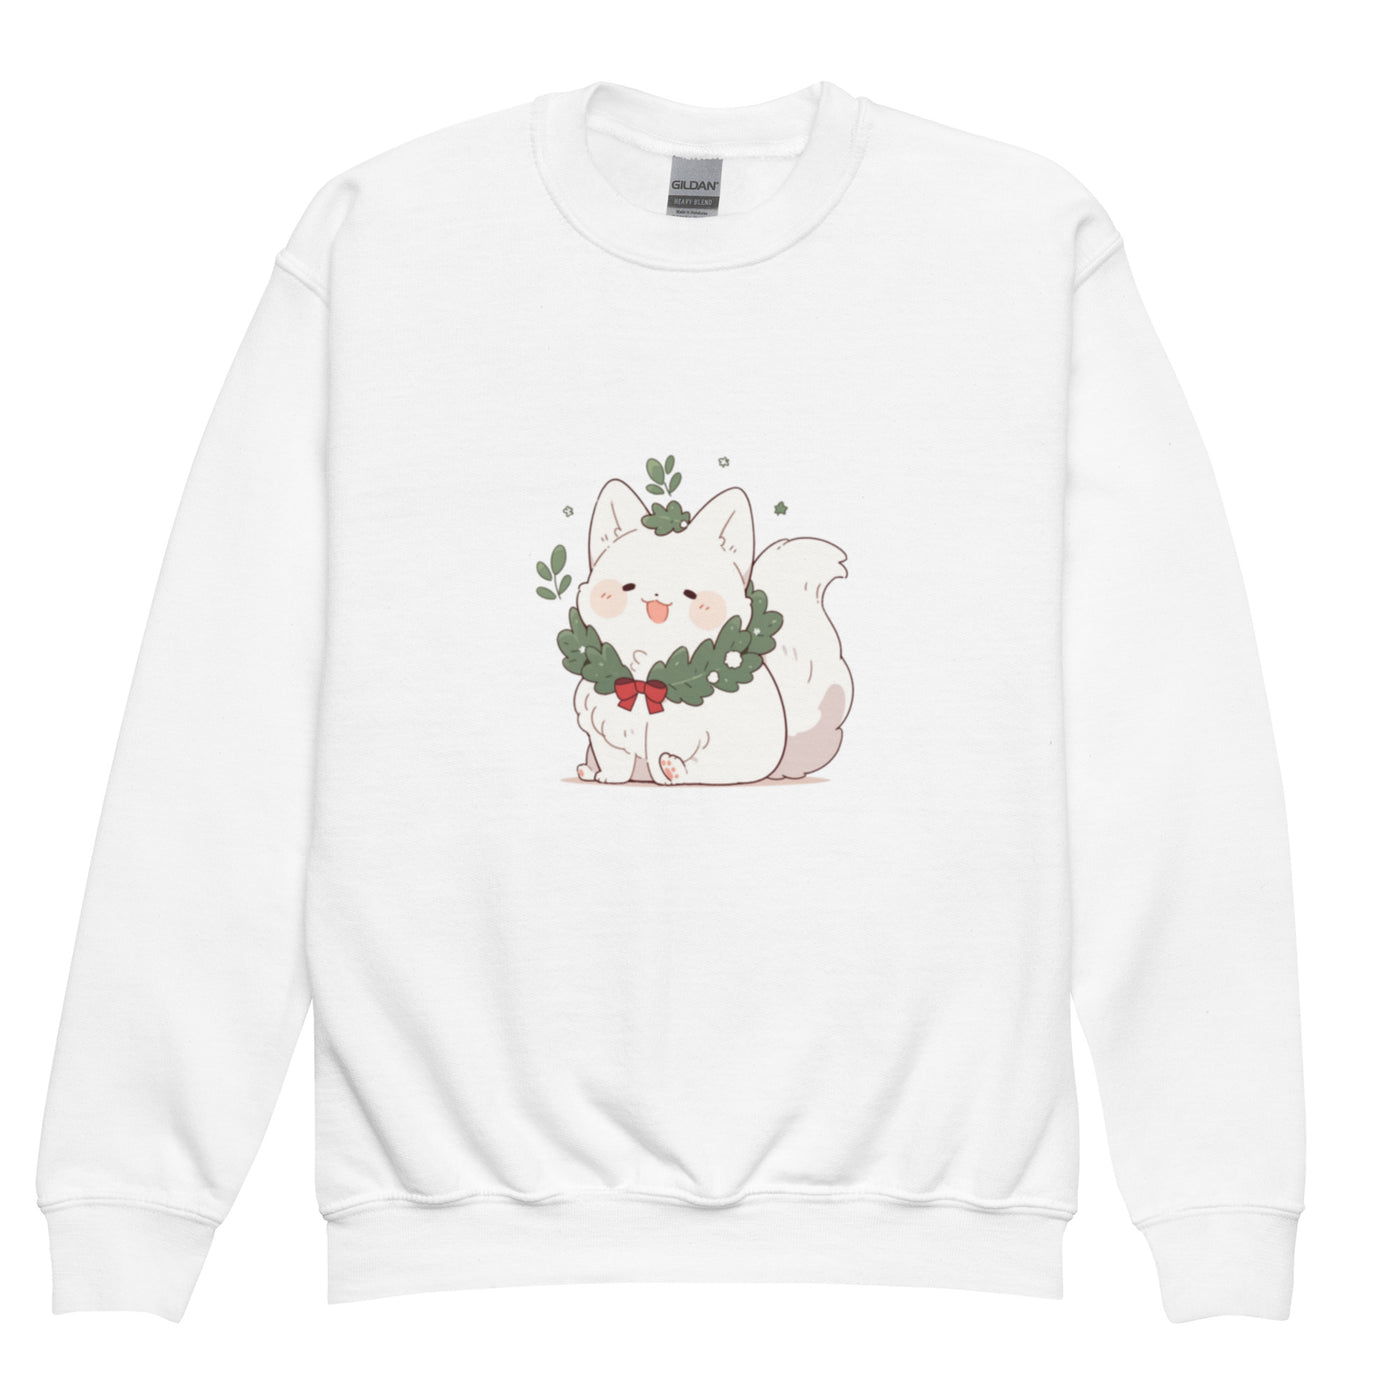 Cat Youth crewneck sweatshirt XS-XL Unisex - Coco Potato - dresses and partywear for little girls